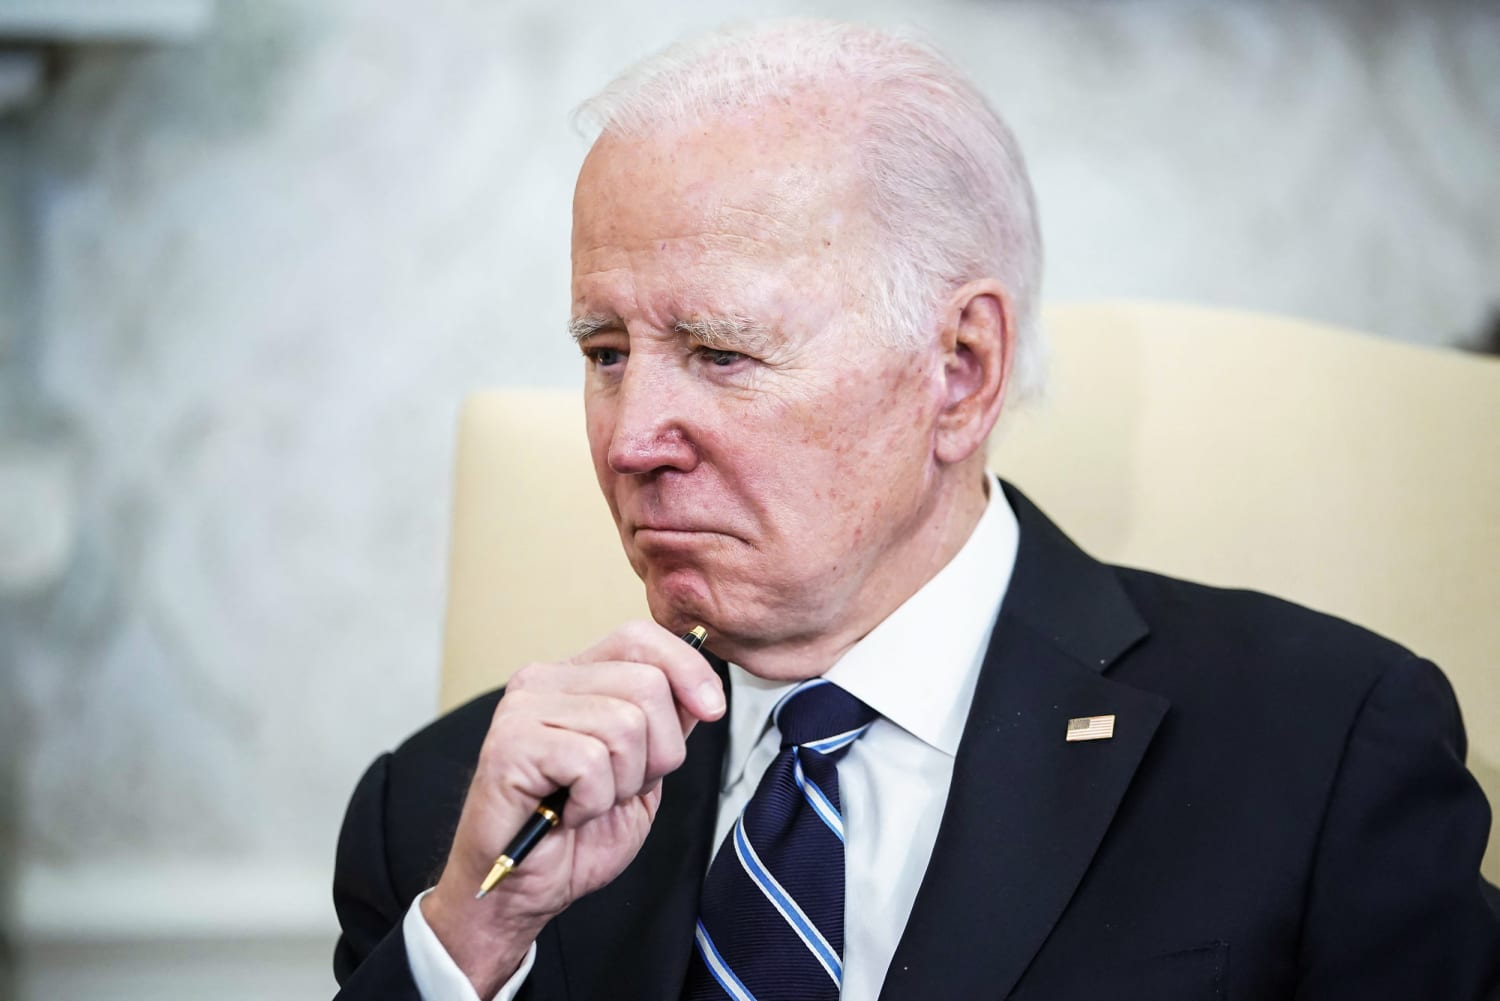 Additional classified items found in Biden's Delaware home during Justice Department search, attorney says